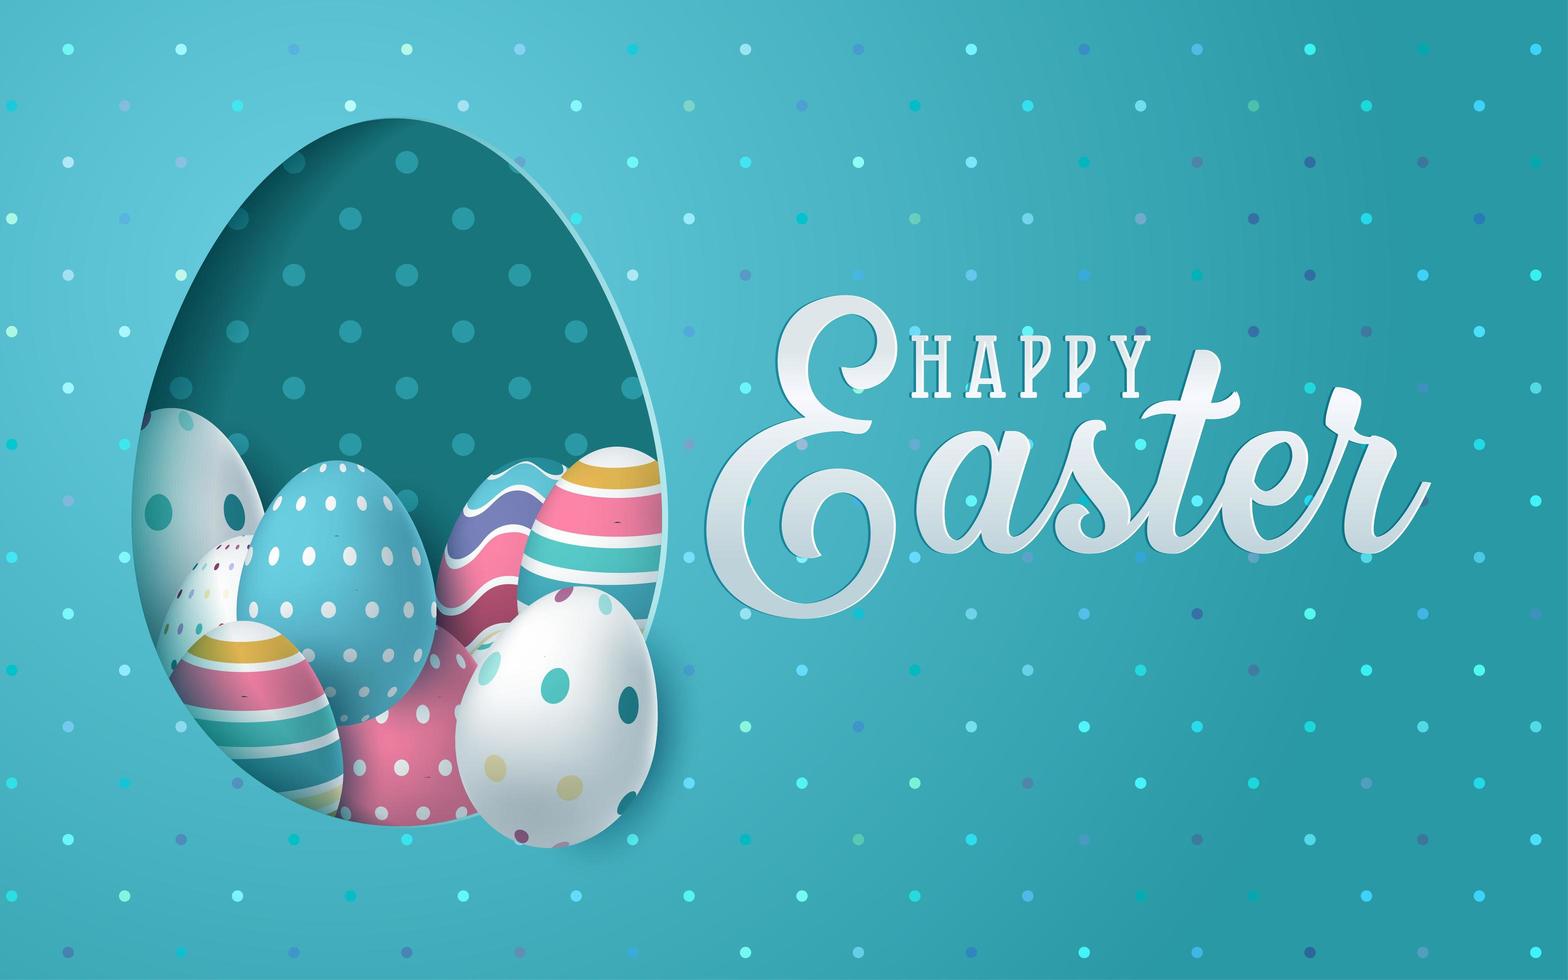 Easter card with paper cut egg shape frame in blue background vector